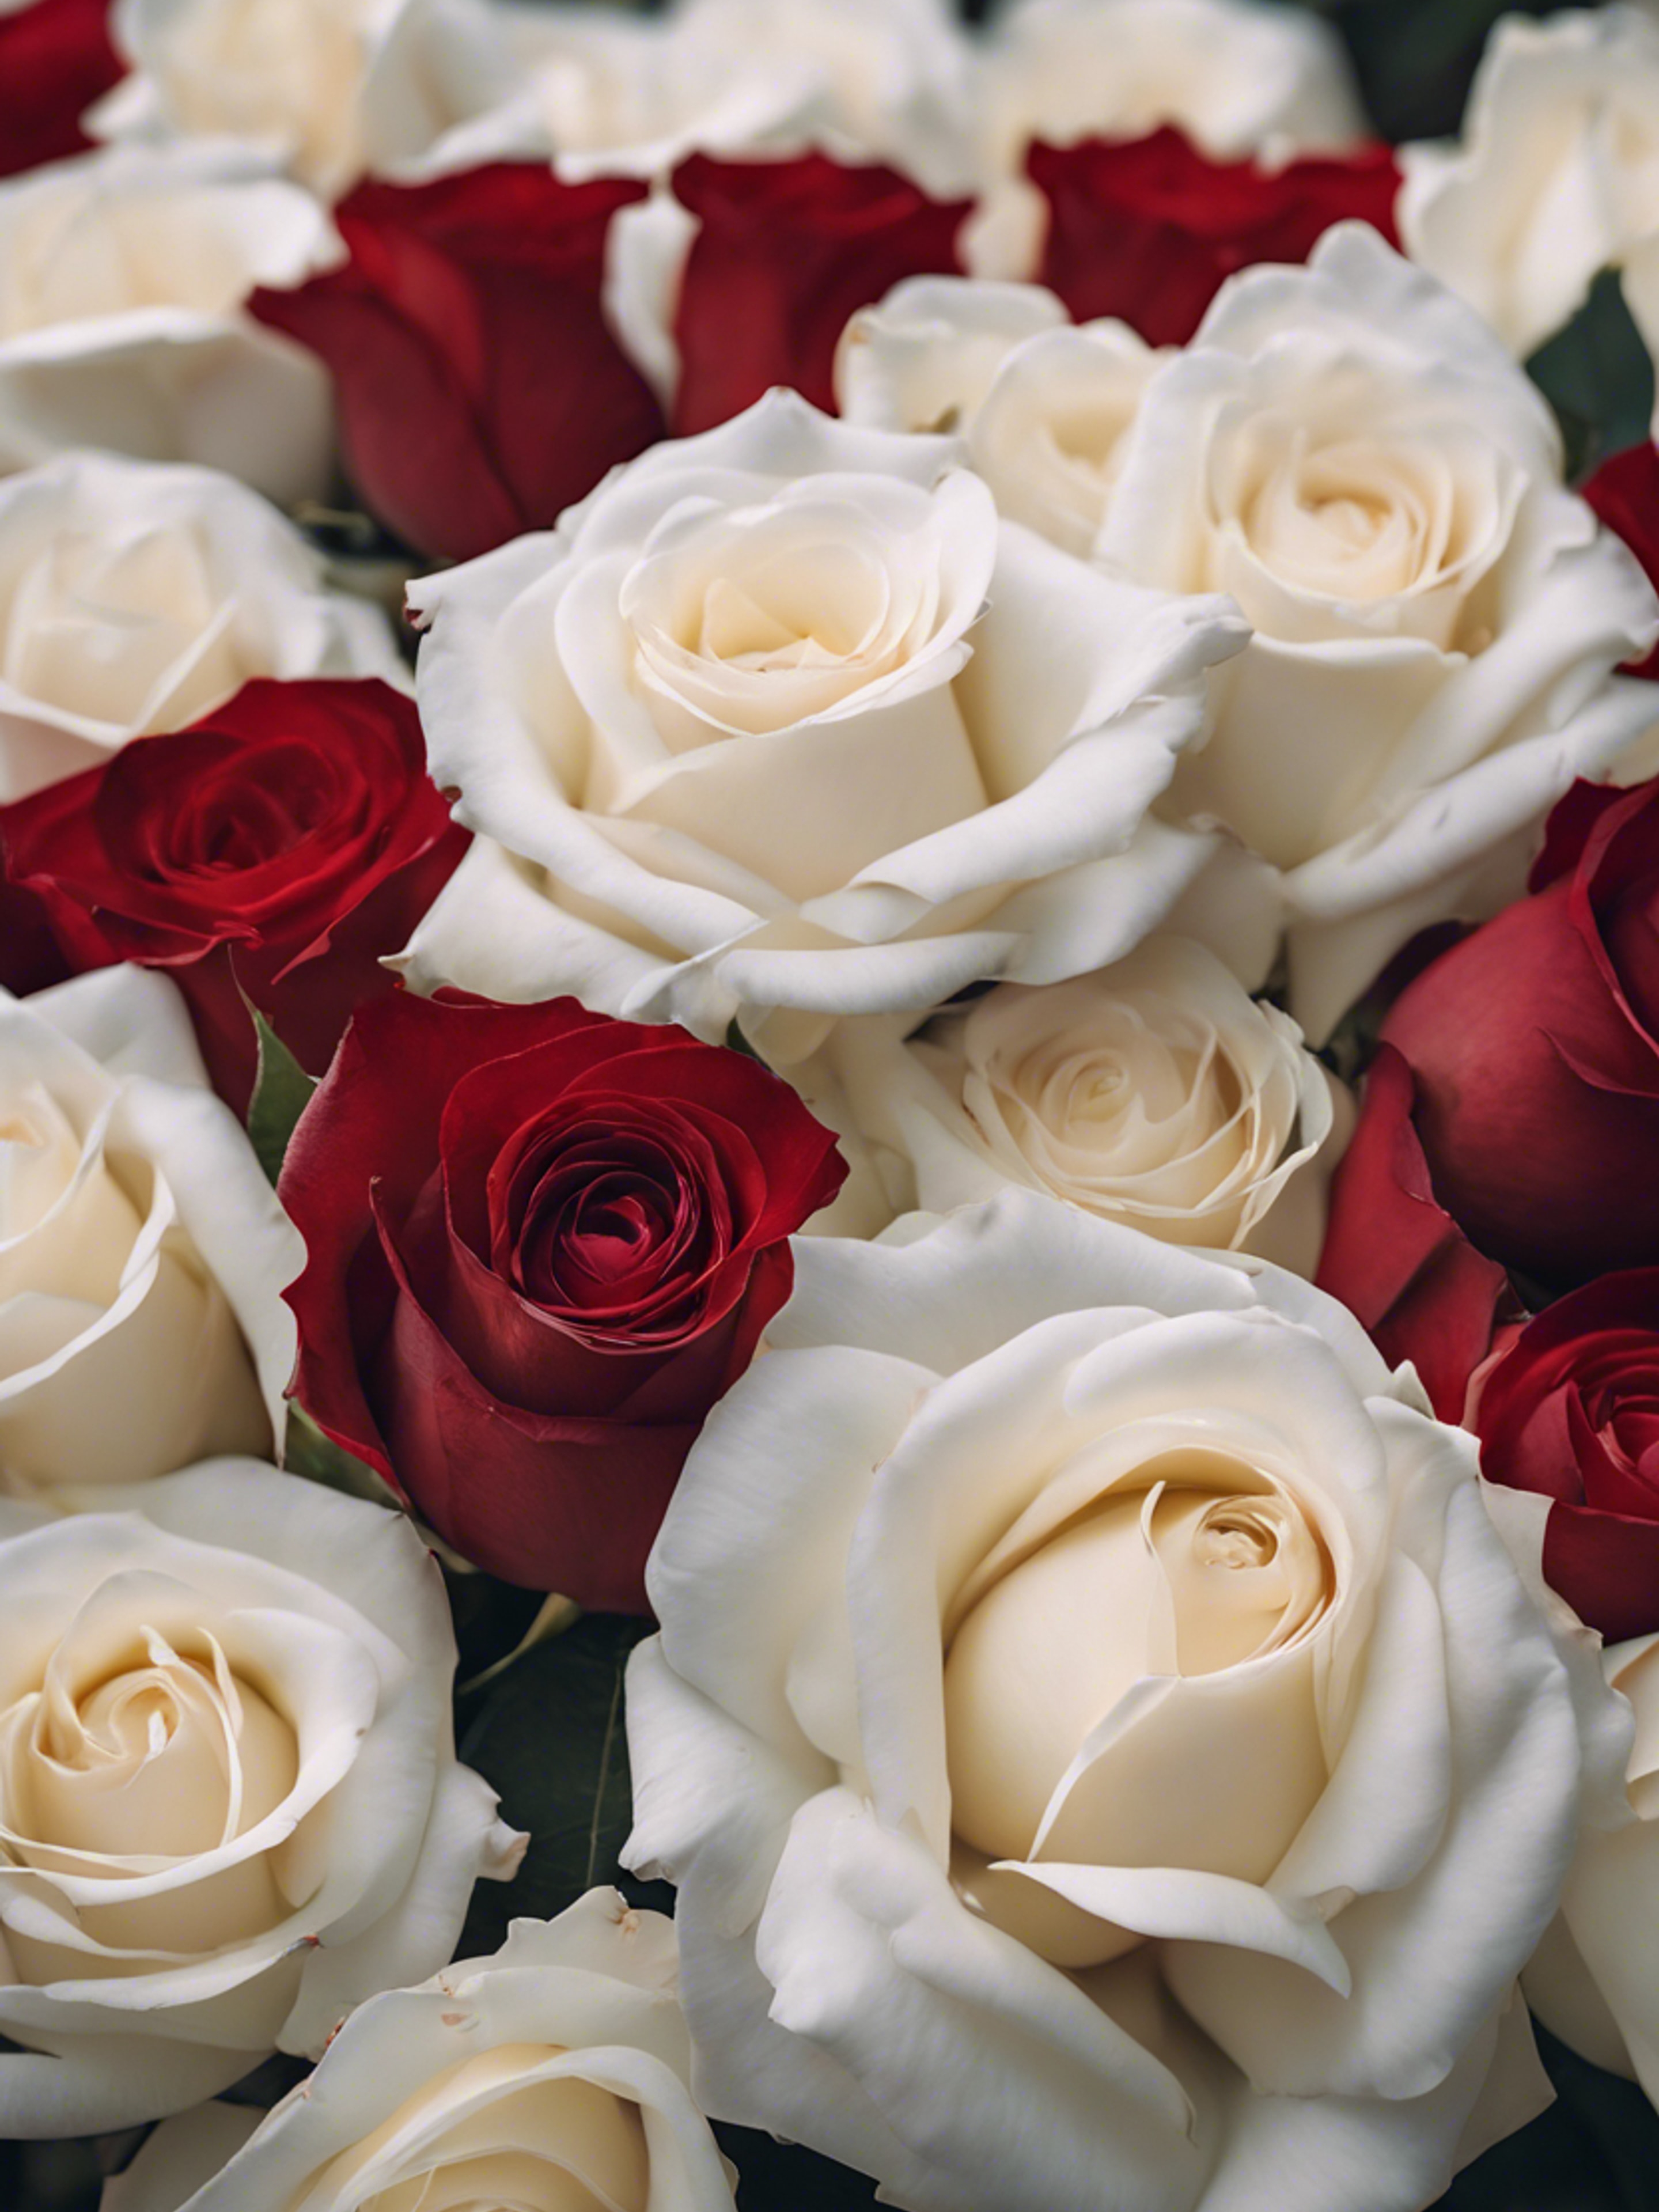 A cluster of white roses with a single red rose nestled in the middle. Tapeta na zeď[ffa8b13685ab483b9eca]